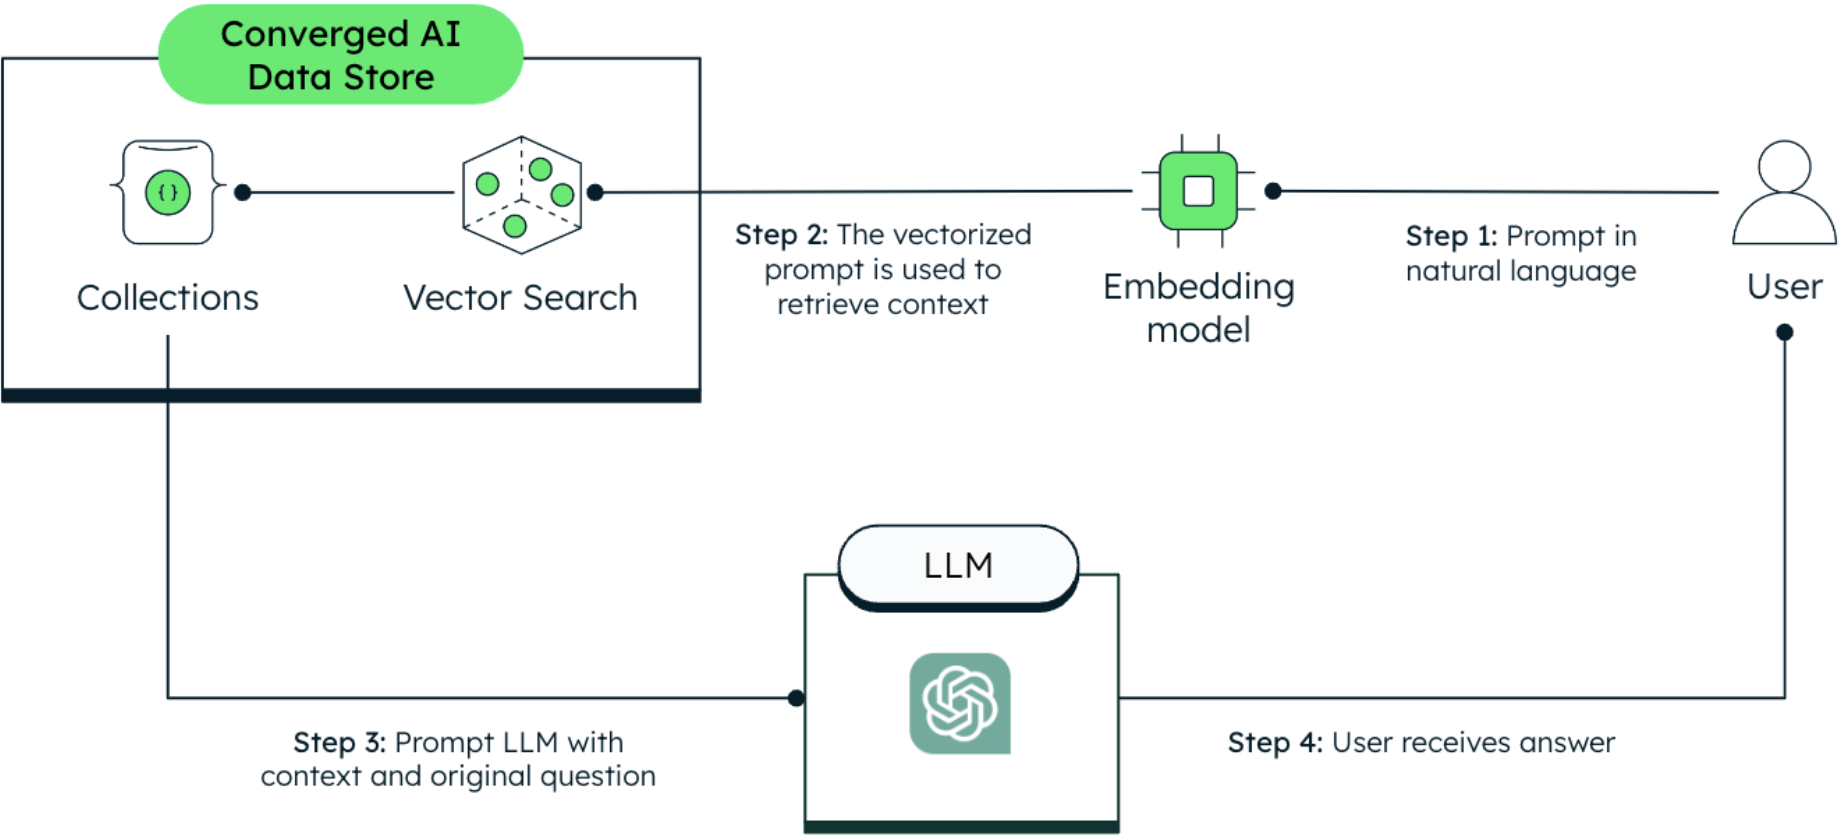 Diagram of RAG where we combine custom data with the LLM. In step 1, the user prompts in natural language through the embedding model. Step 2, the vectorized prompt is used to retrieve context through the Converged AI Data Store. Step 3, the LLM is prompted with context and original question. Step 4, the user receives the answer. 